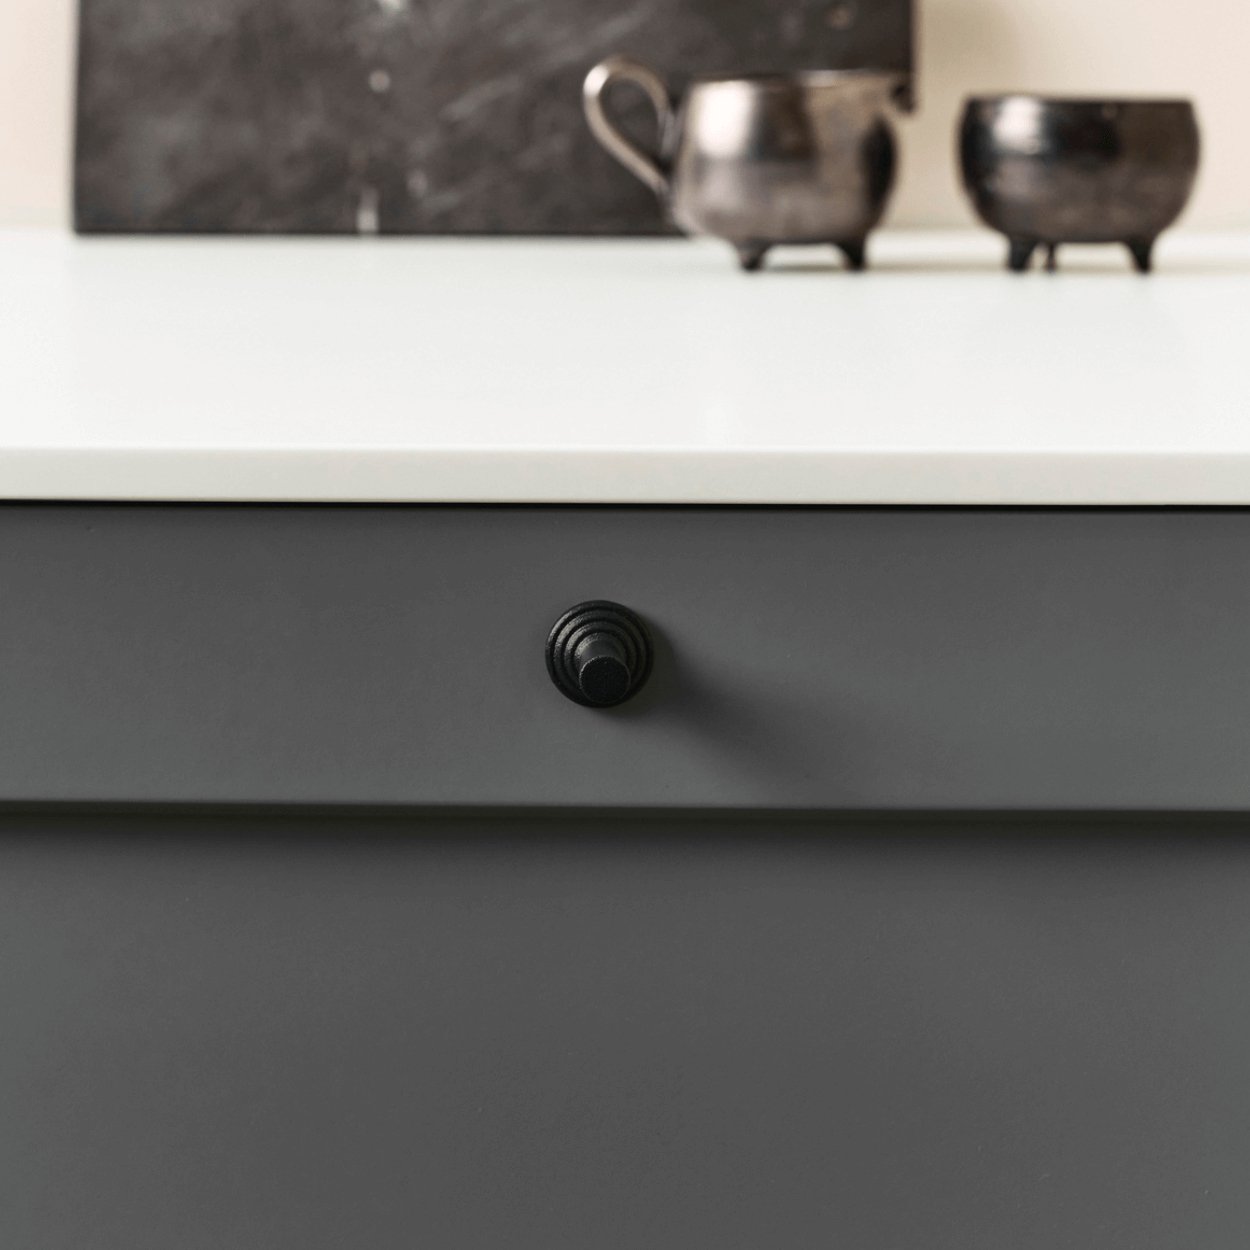 motion cast iron knob fixed to kitchen cabinet